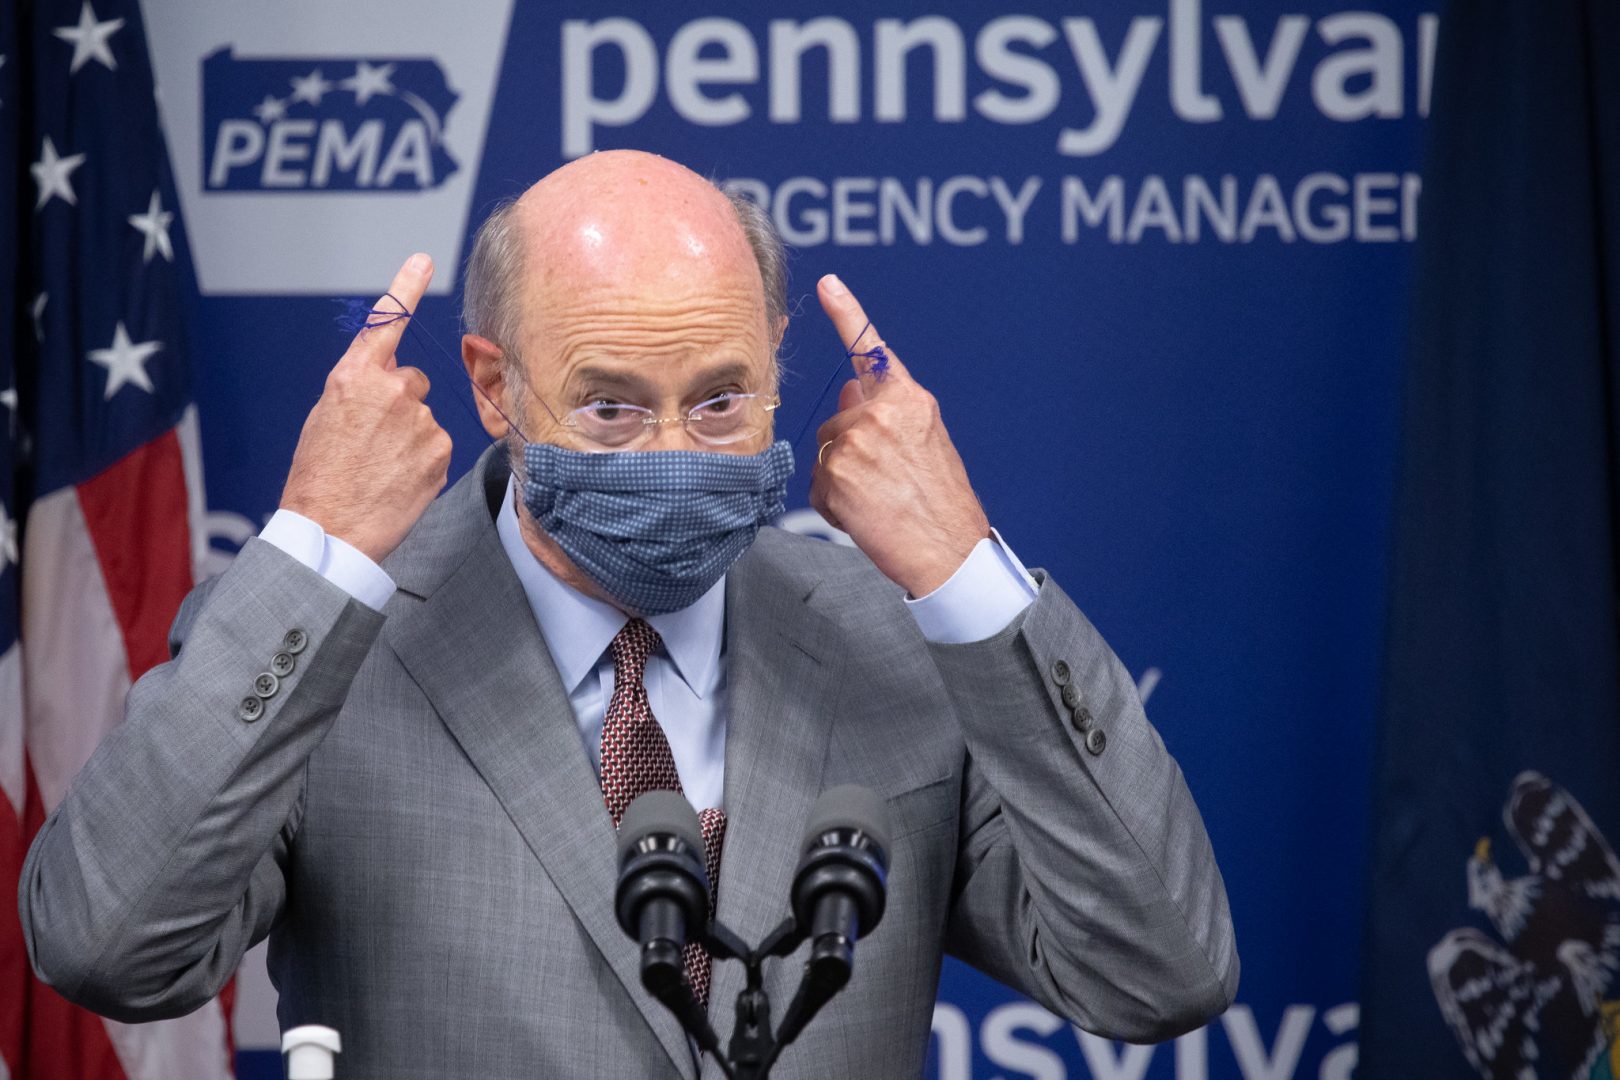 Pennsylvania Governor Tom Wolf removes his mask before answering questions from the press. Harrisburg, PA — June 8, 2020